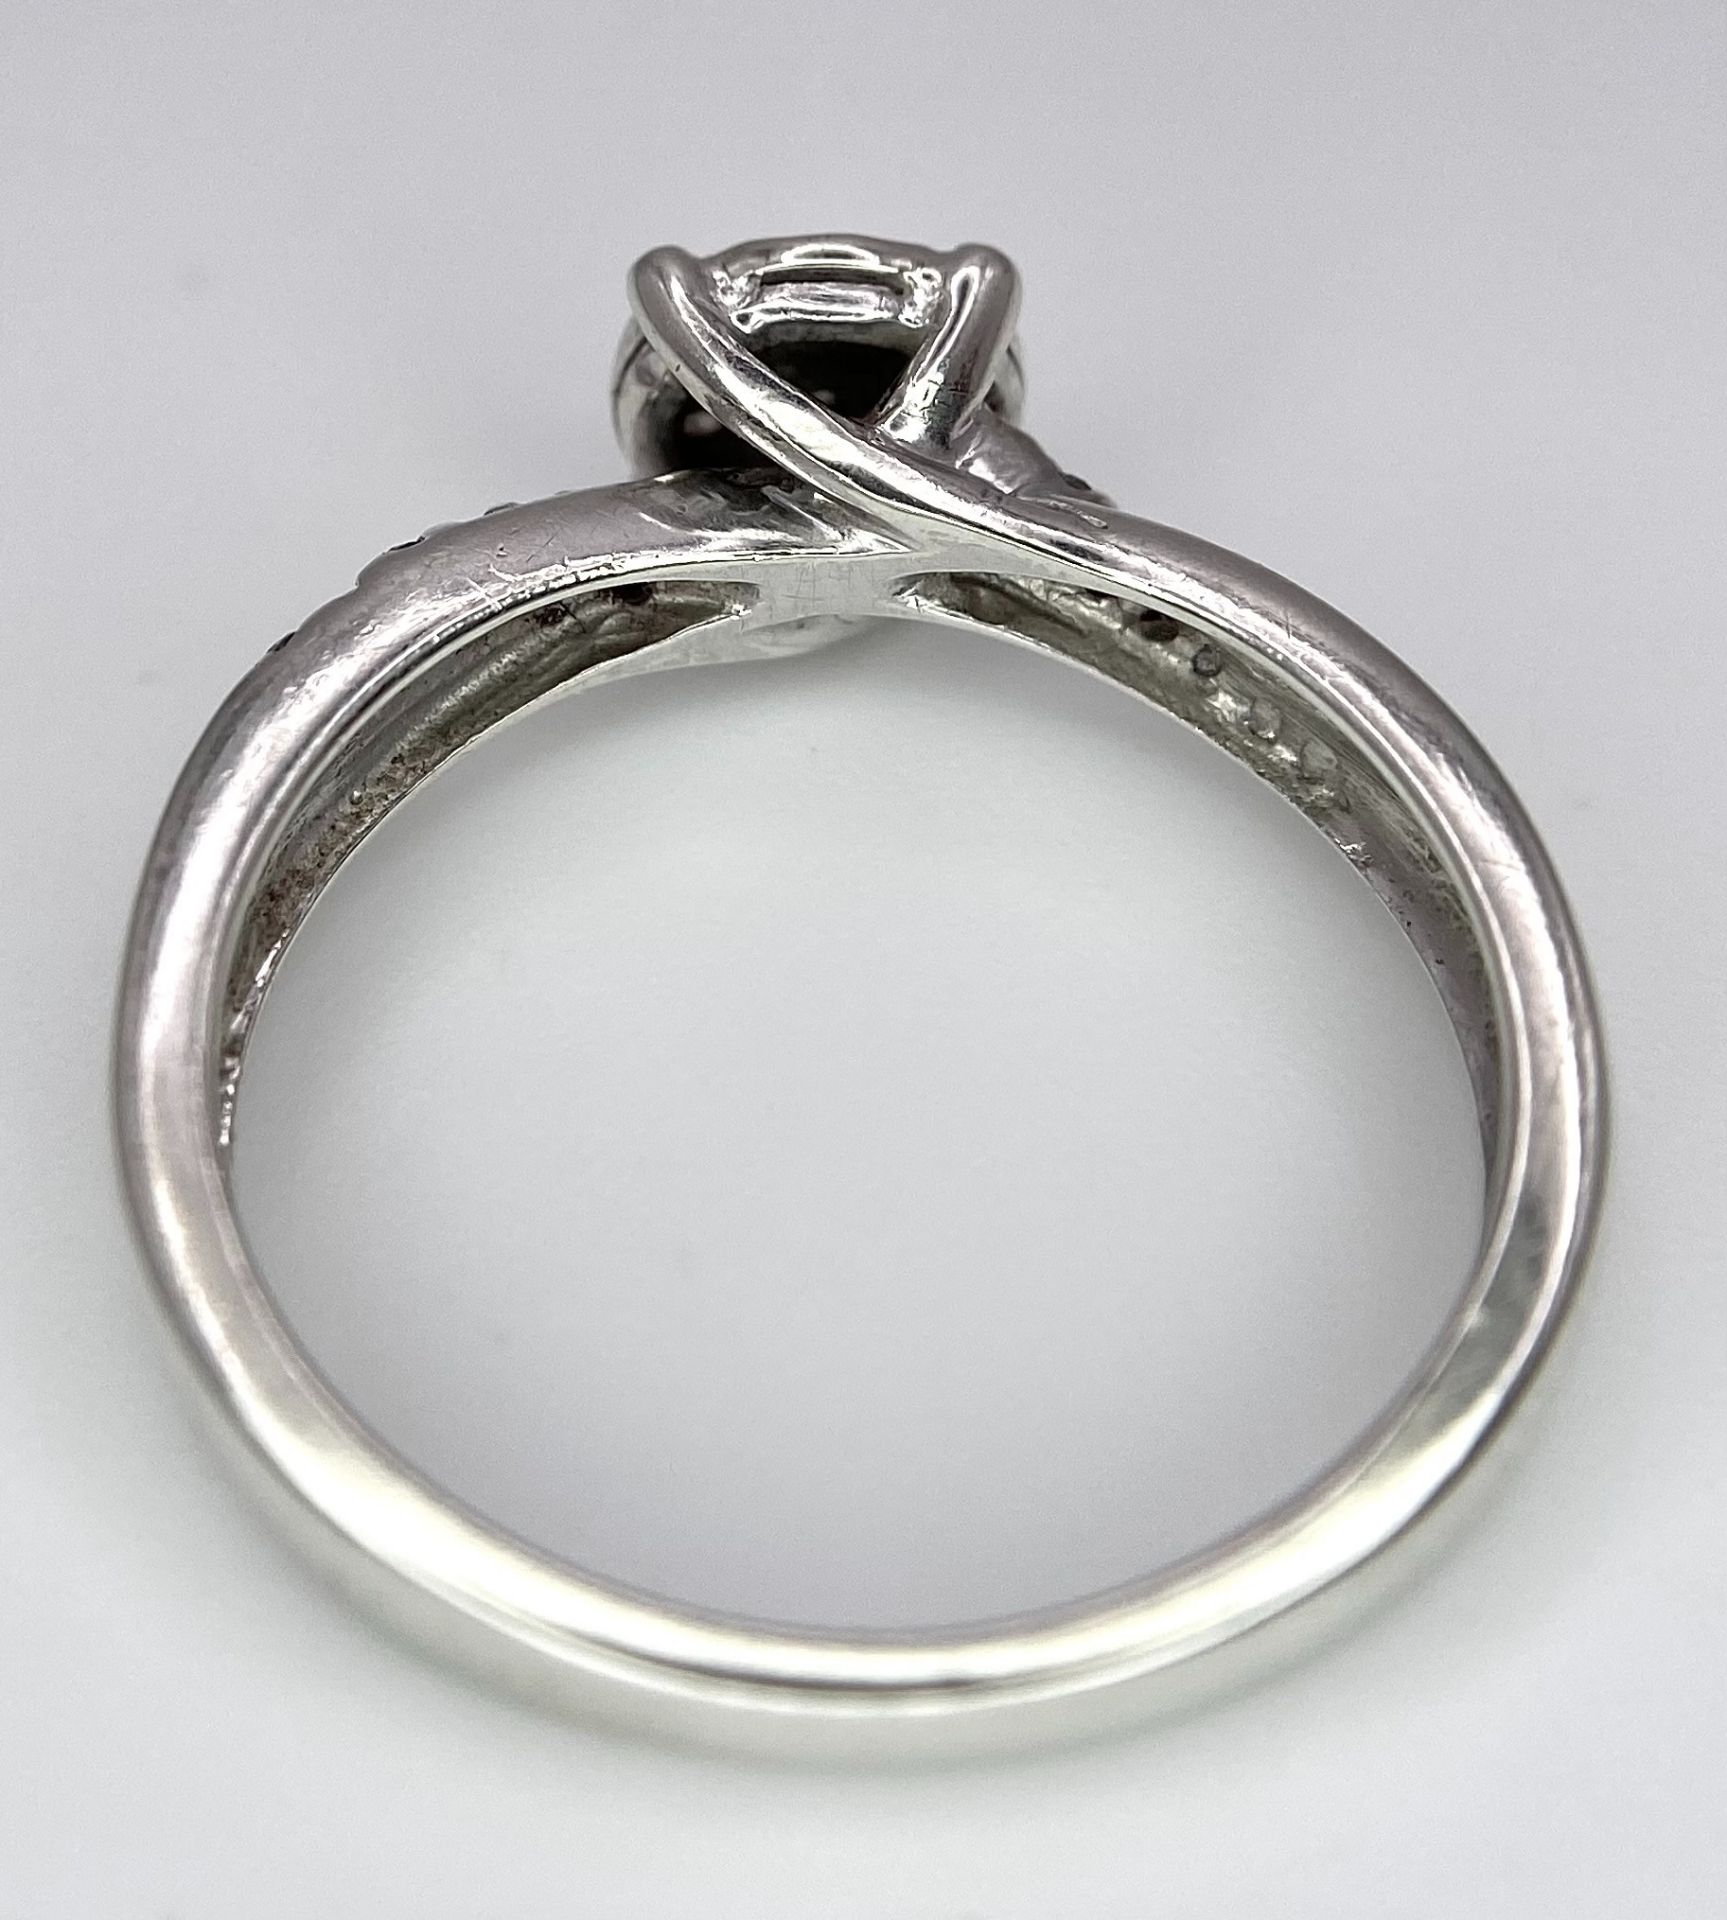 A 9K White Gold Diamond Cluster Ring. Seven small diamonds on a circular base with diamonds on - Image 6 of 6